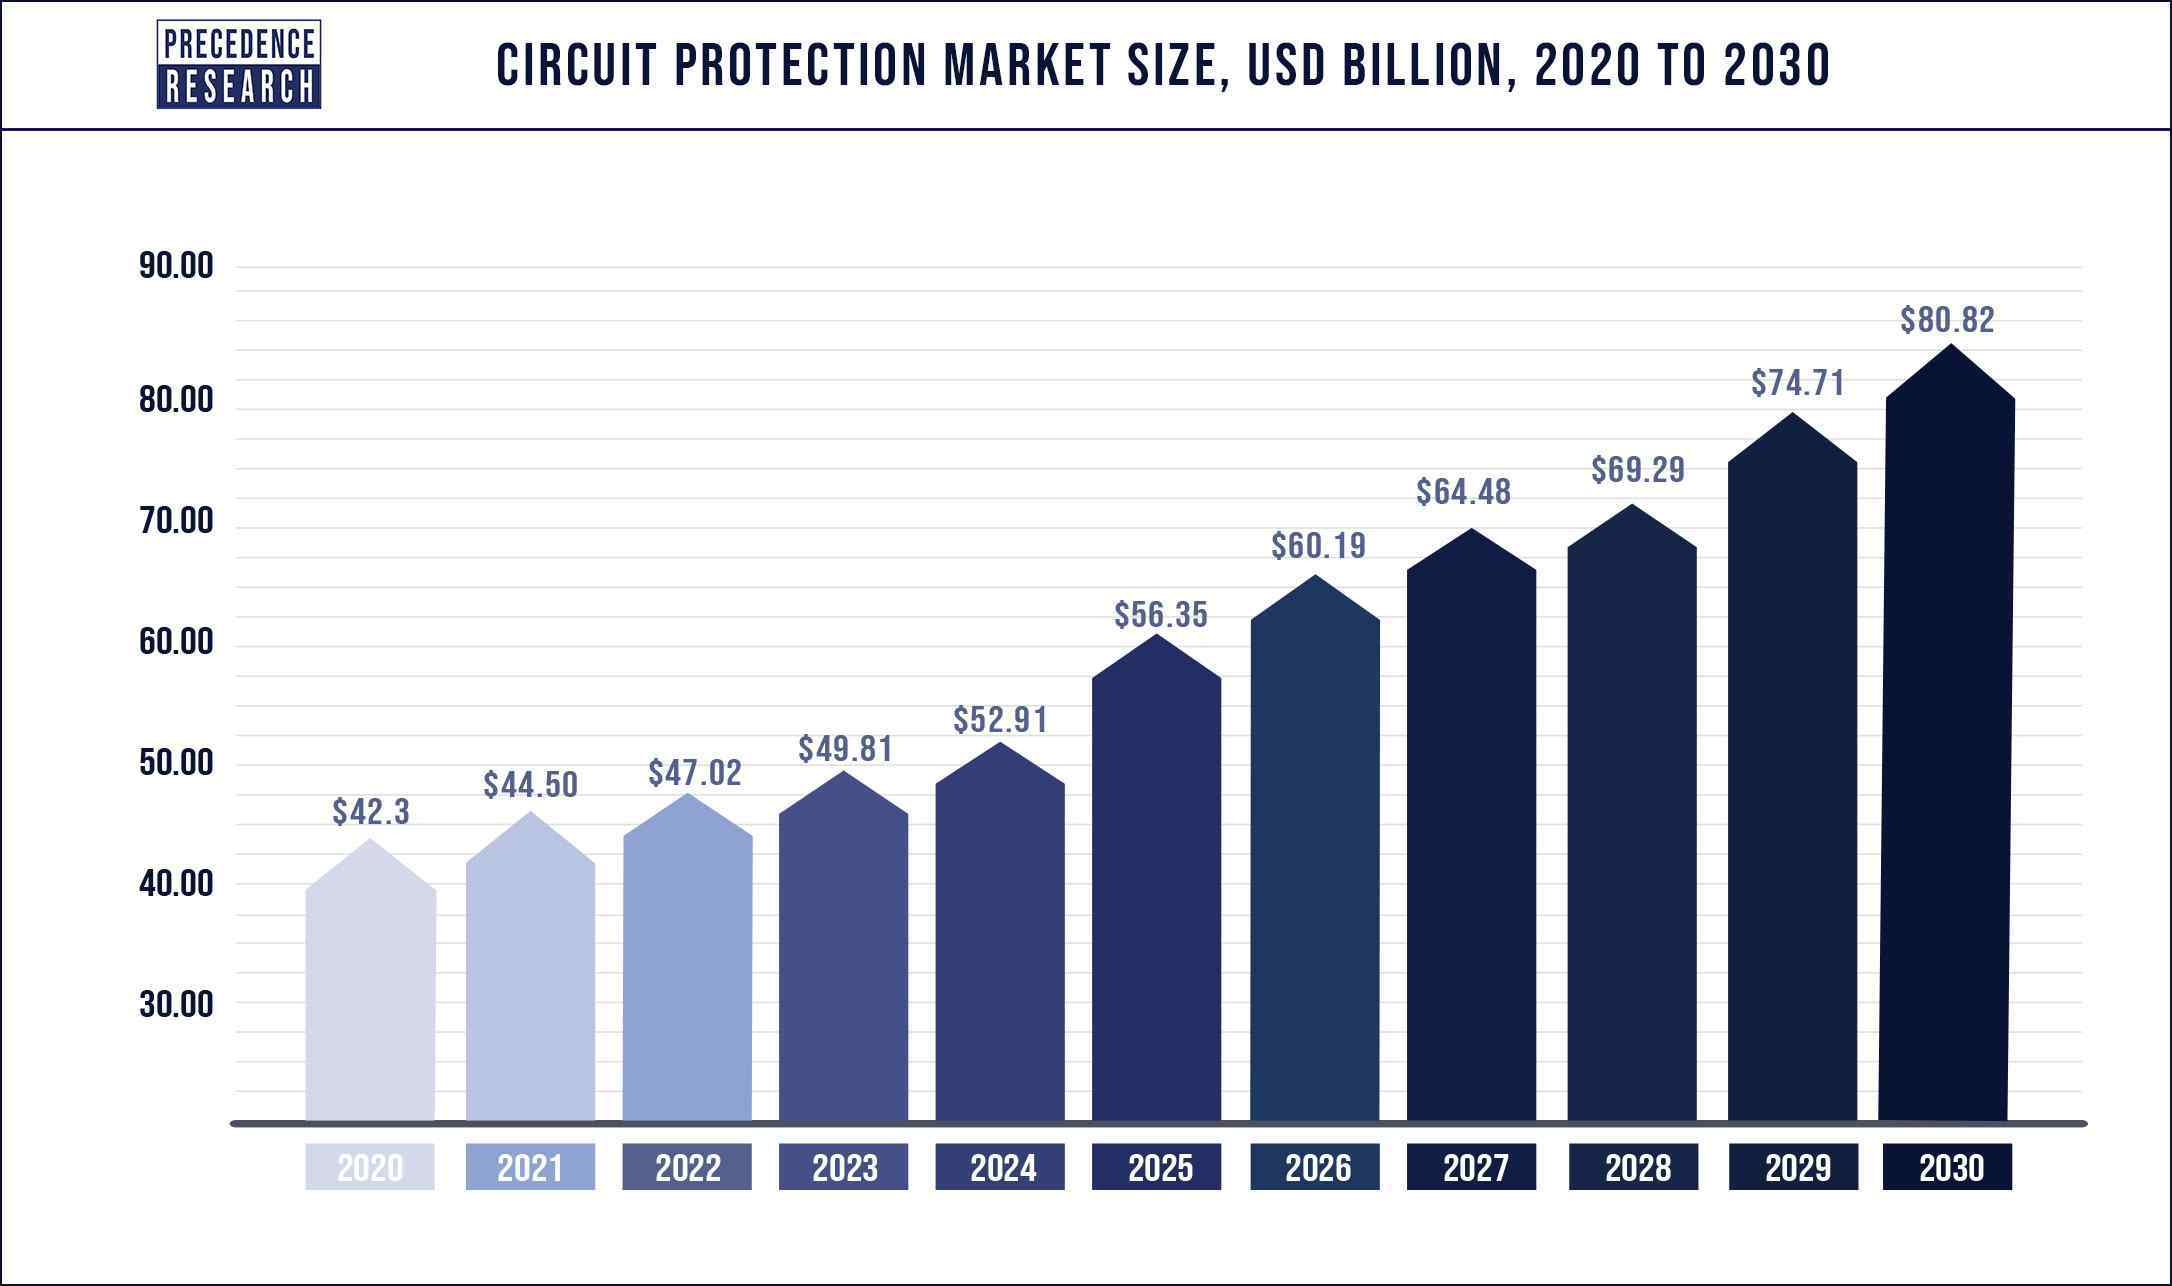 Circuit Protection Market Size 2020 to 2030